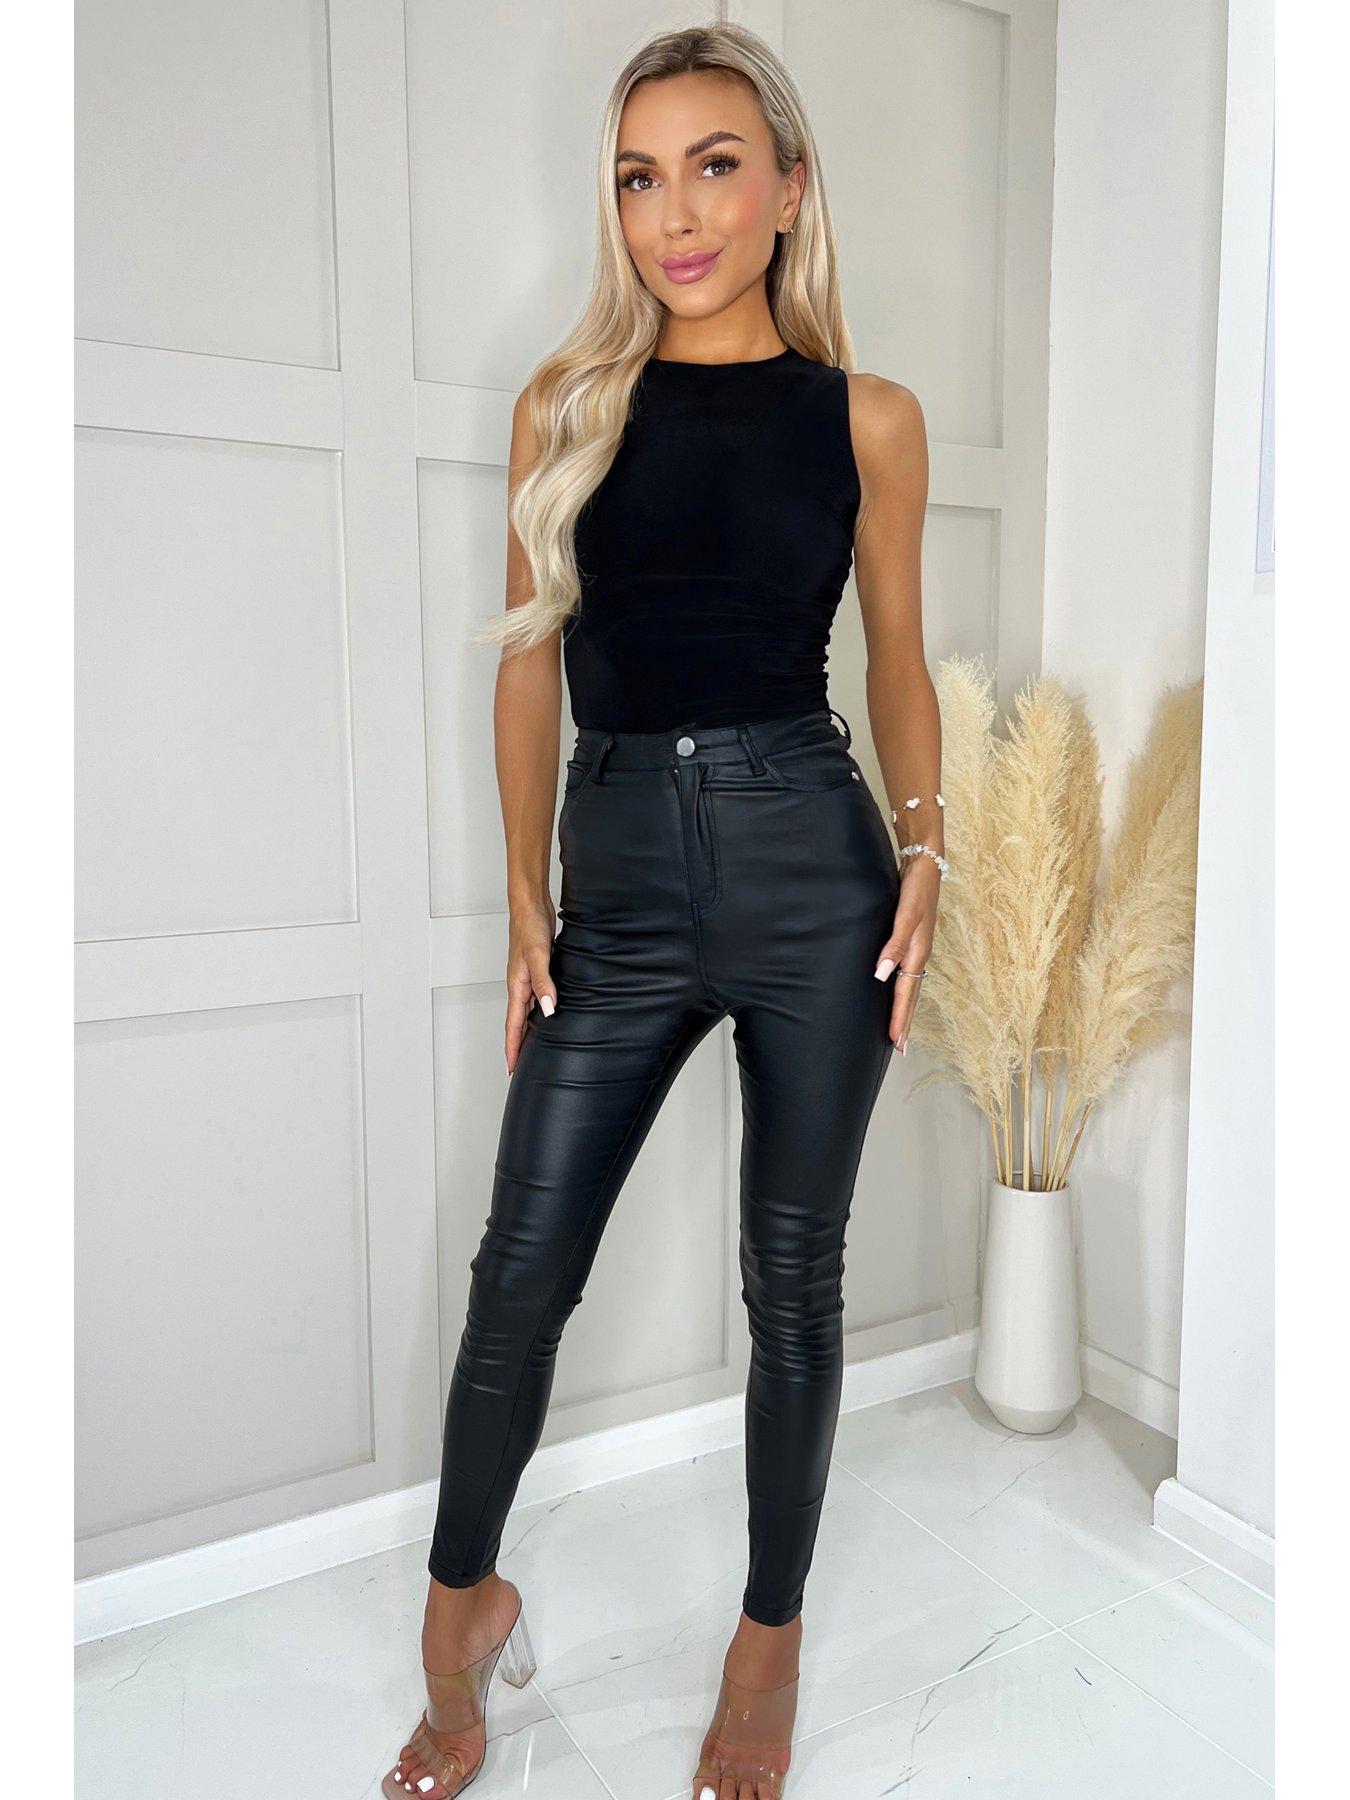 AX Paris Black Faux Leather Skinny Jeans | very.co.uk